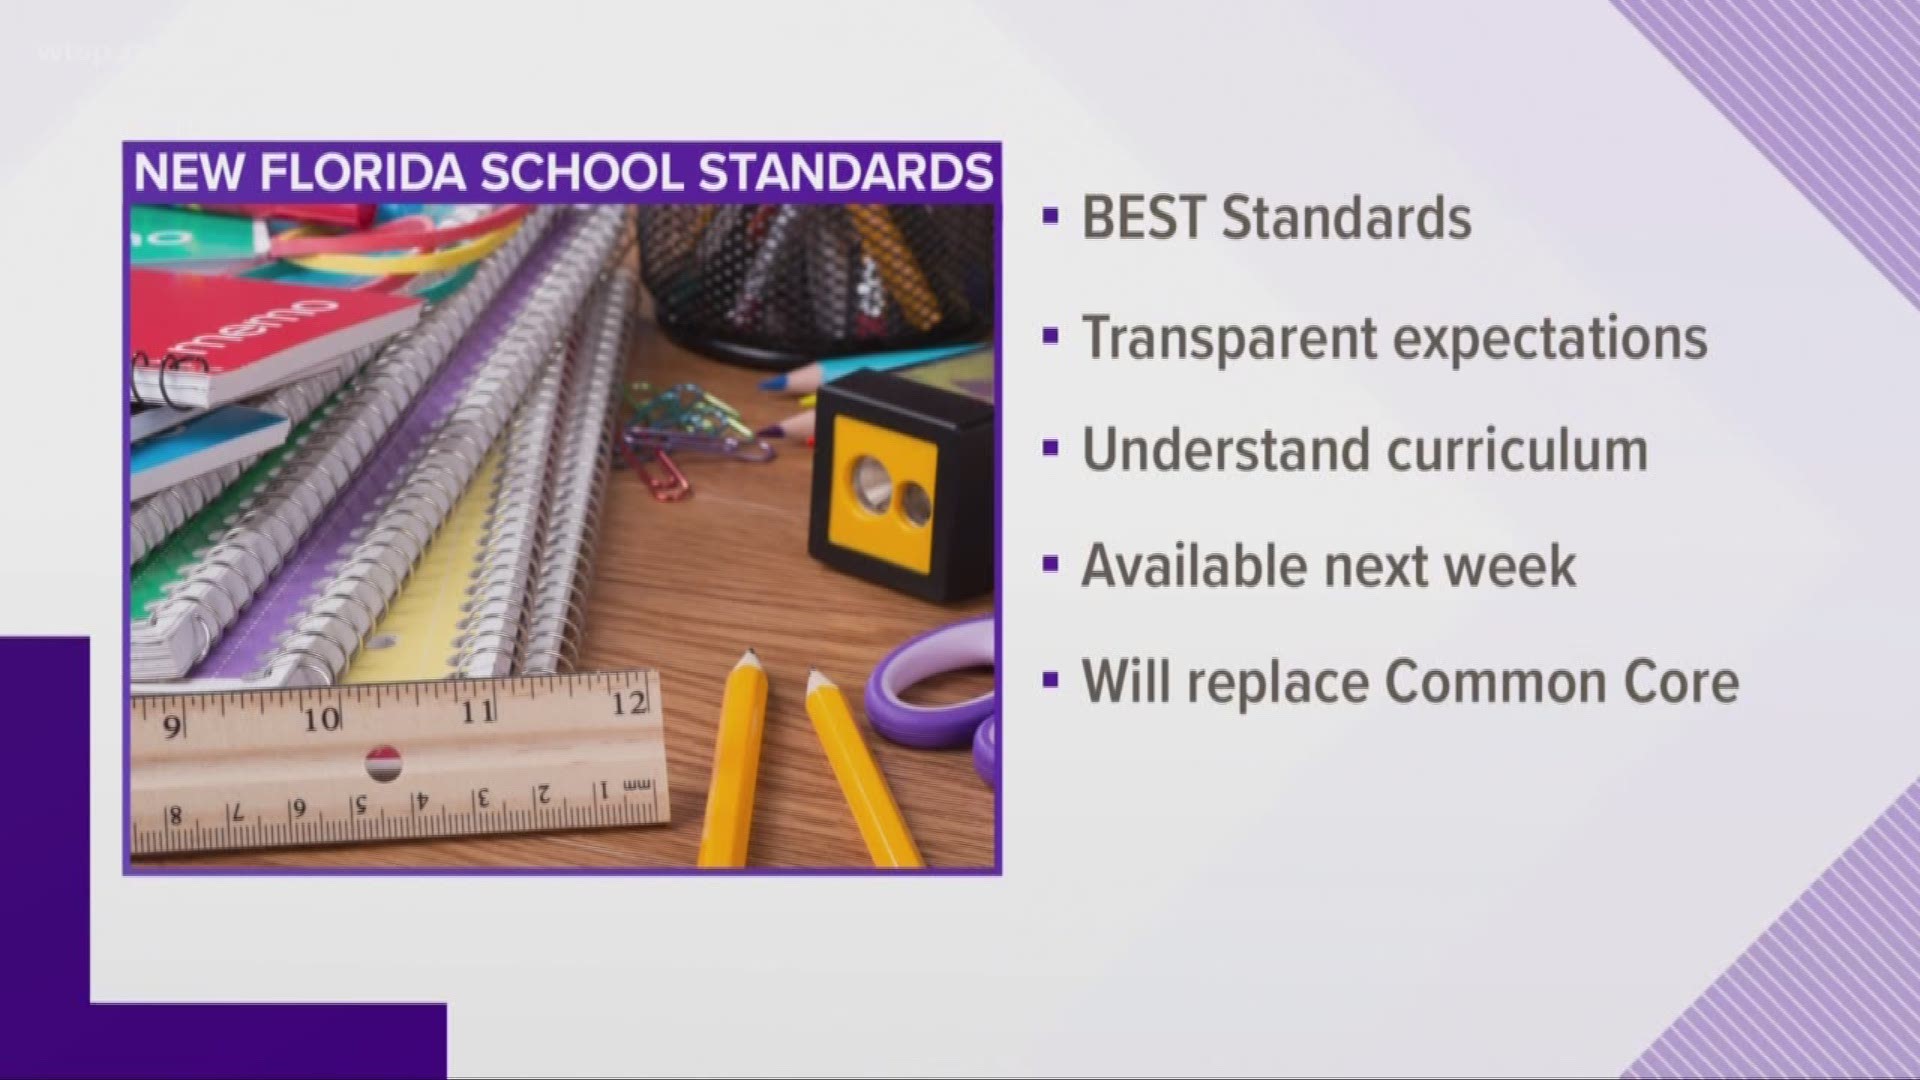 The new curriculum will be called "BEST" – Benchmark for Excellent Student Thinking.